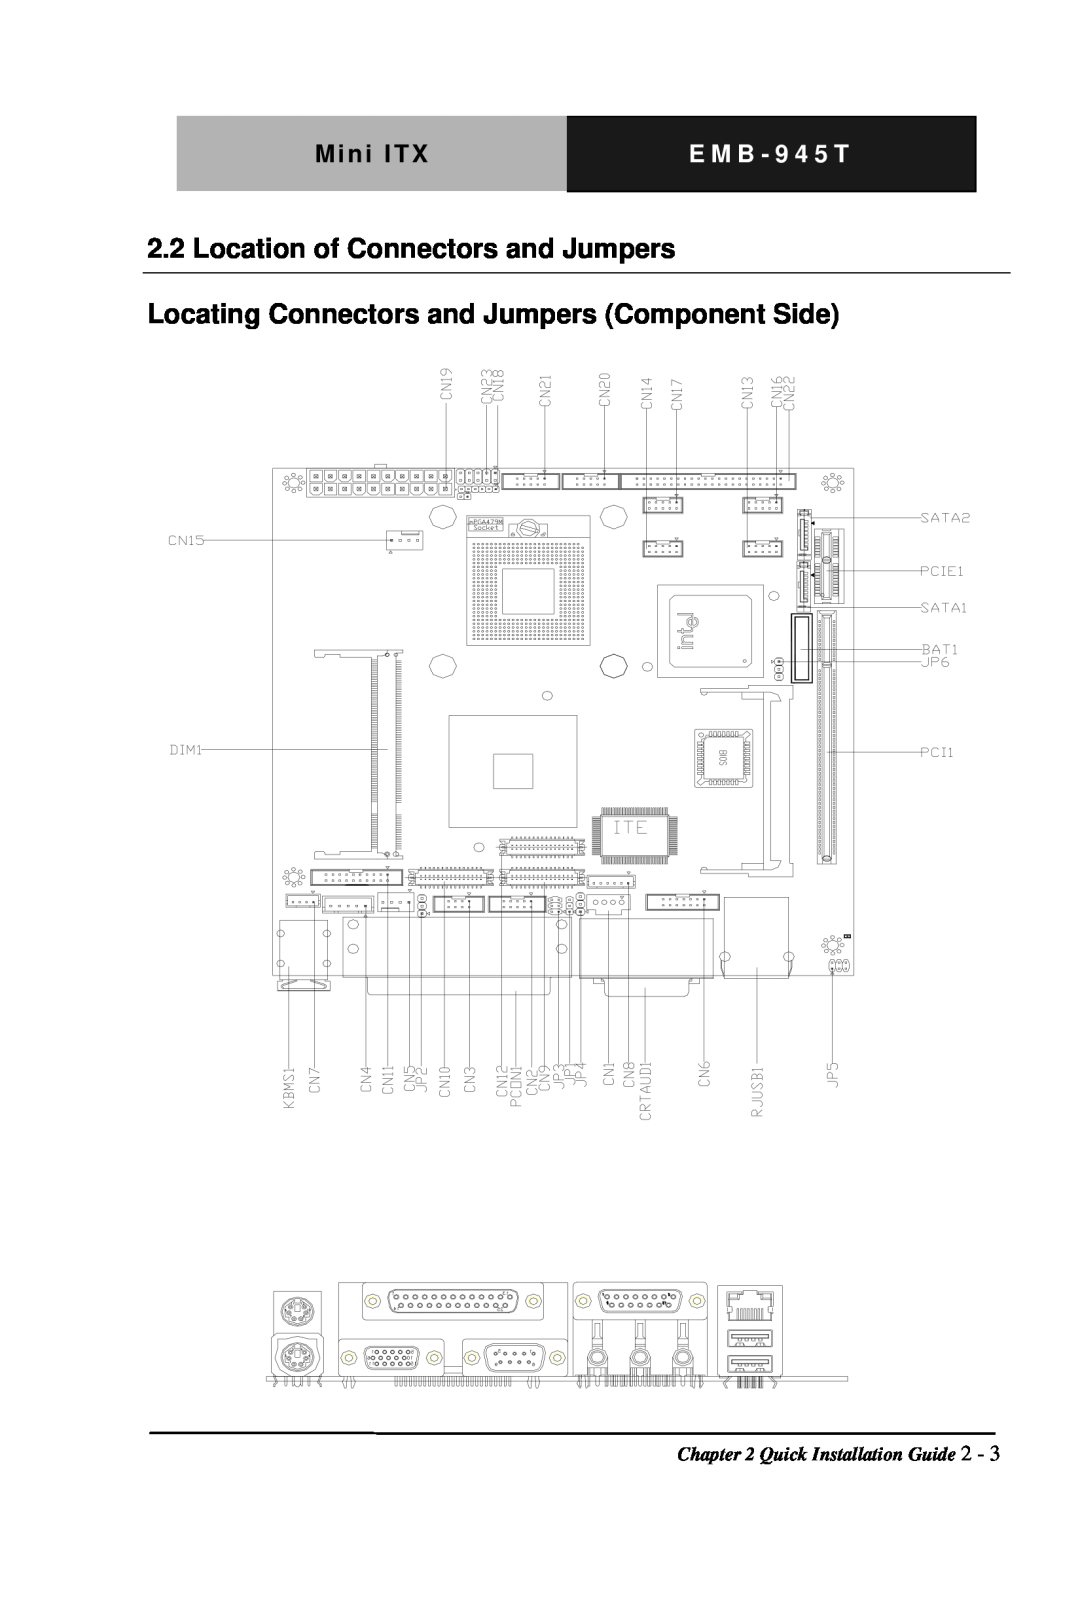 Intel EMB-945T manual Location of Connectors and Jumpers, Locating Connectors and Jumpers Component Side, Mini ITX 